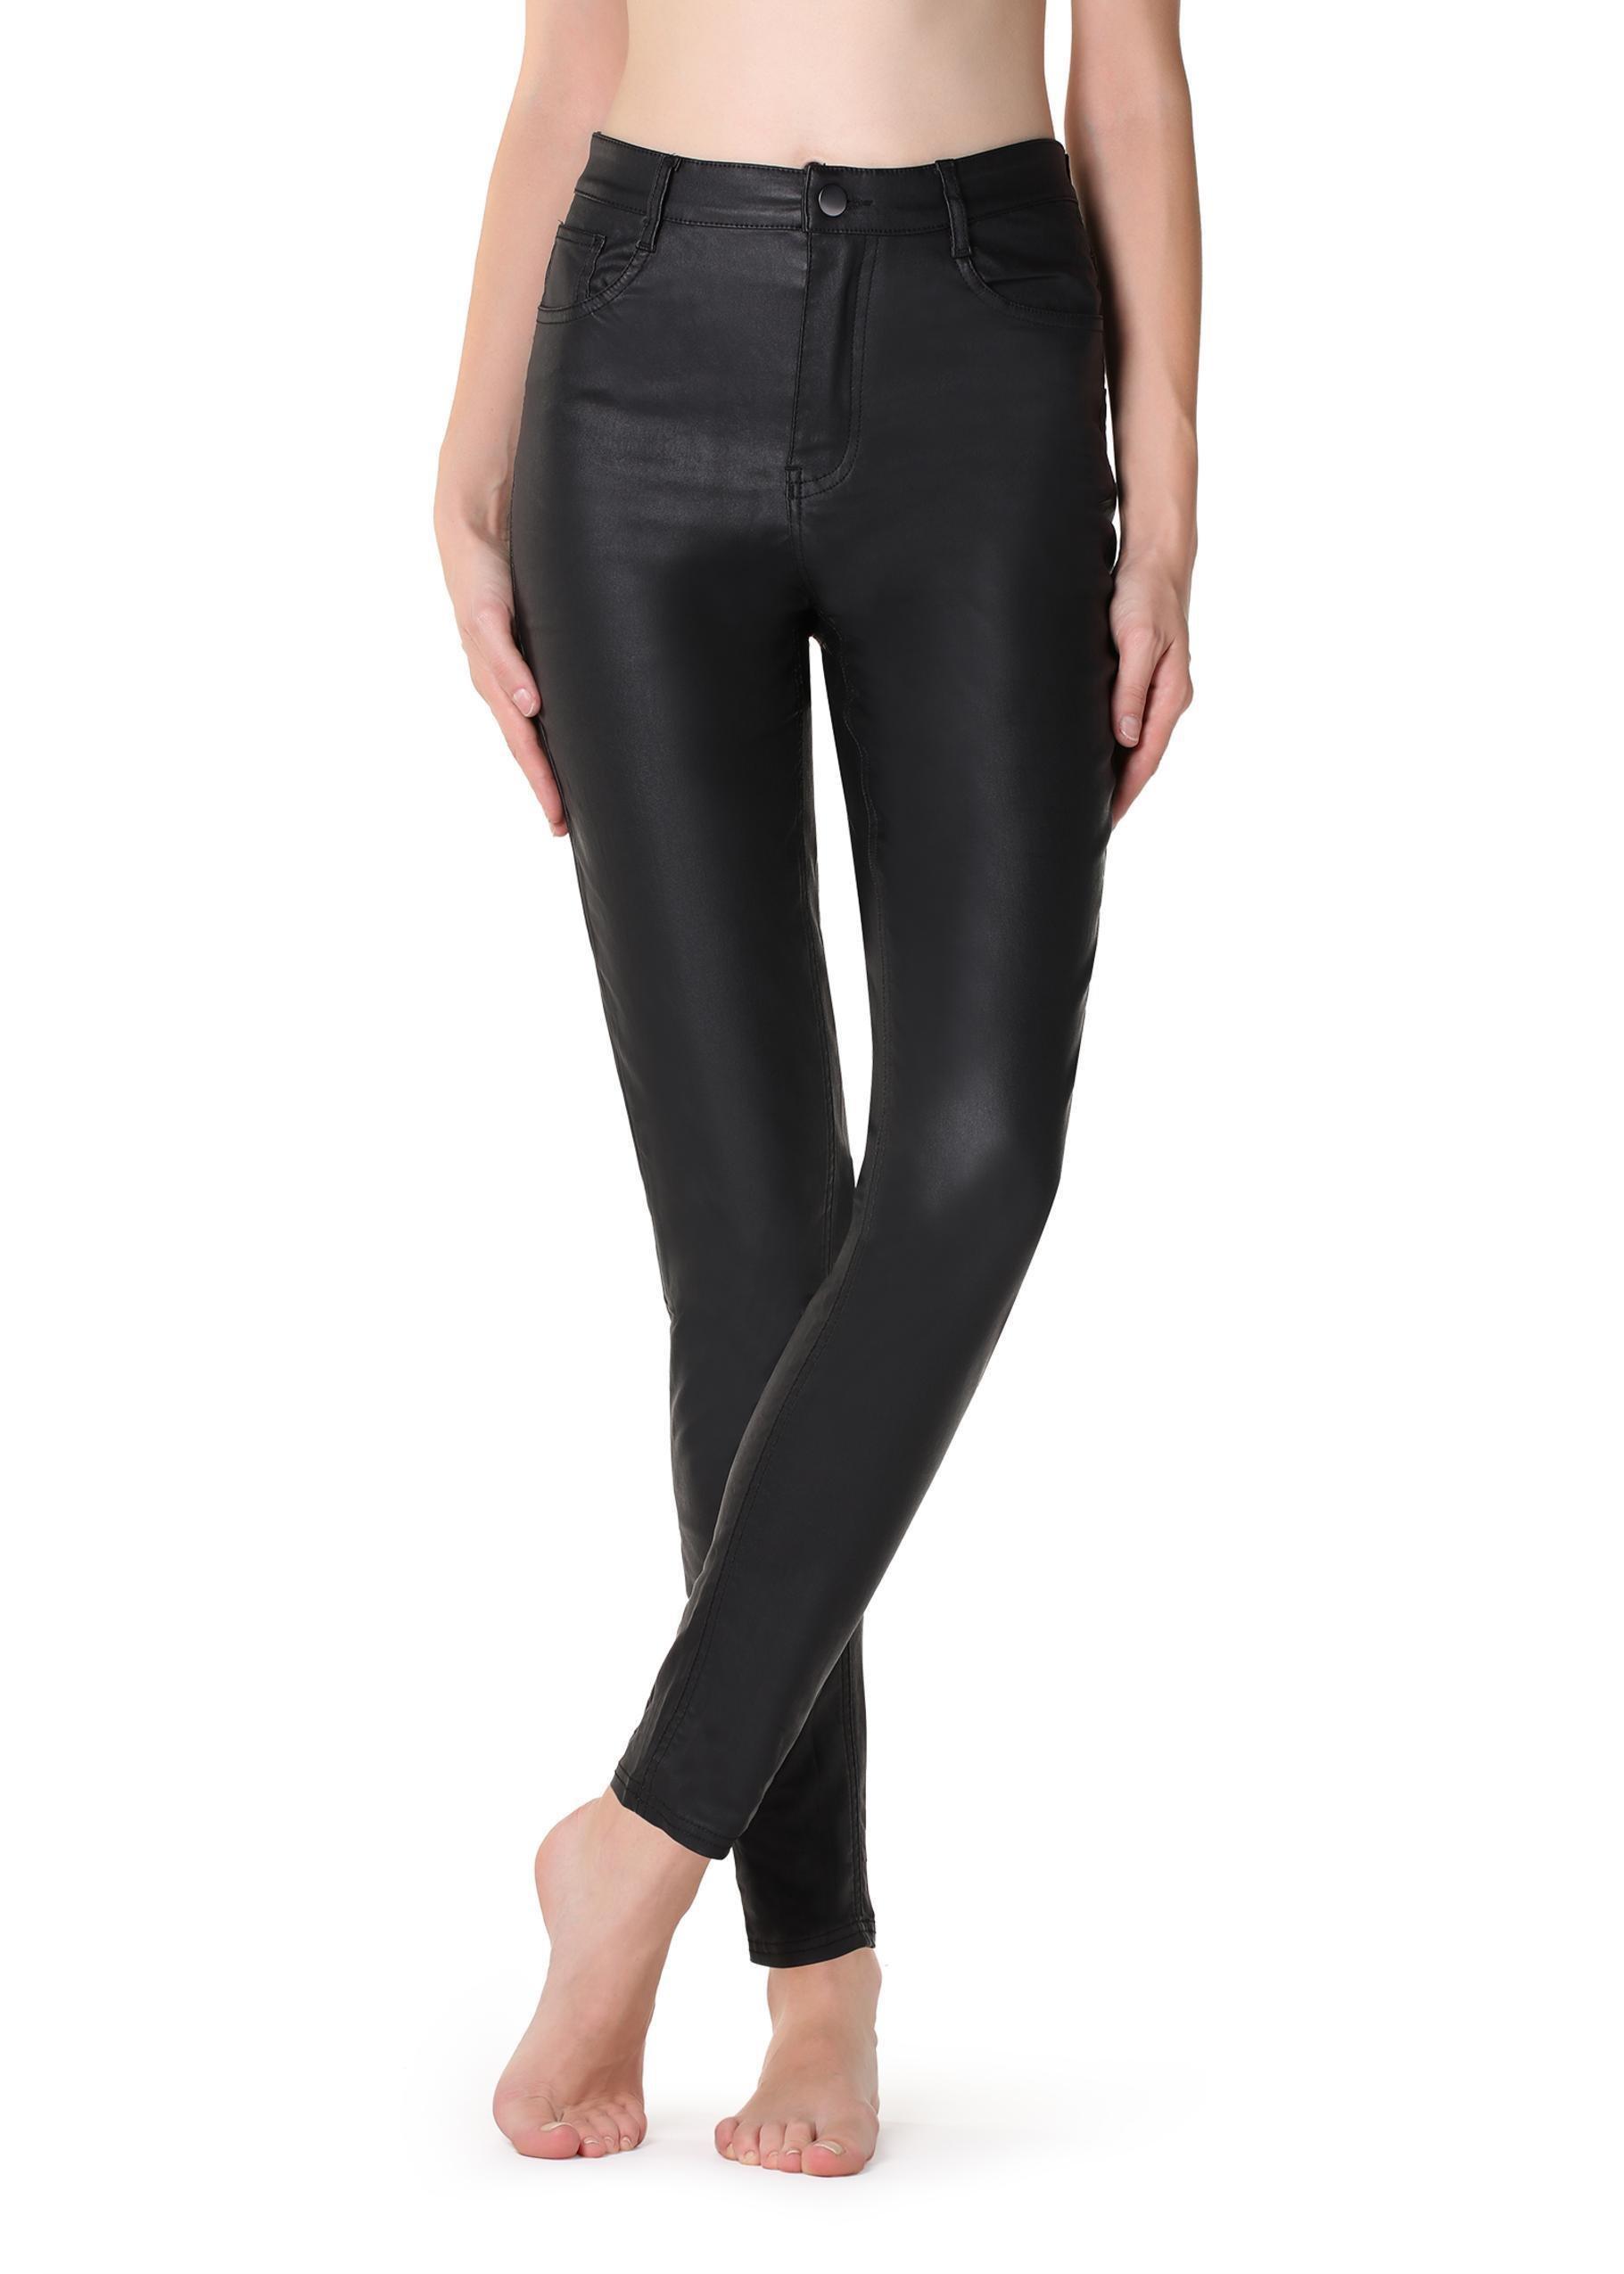 Calzedonia - Black Leather-Look Jeans